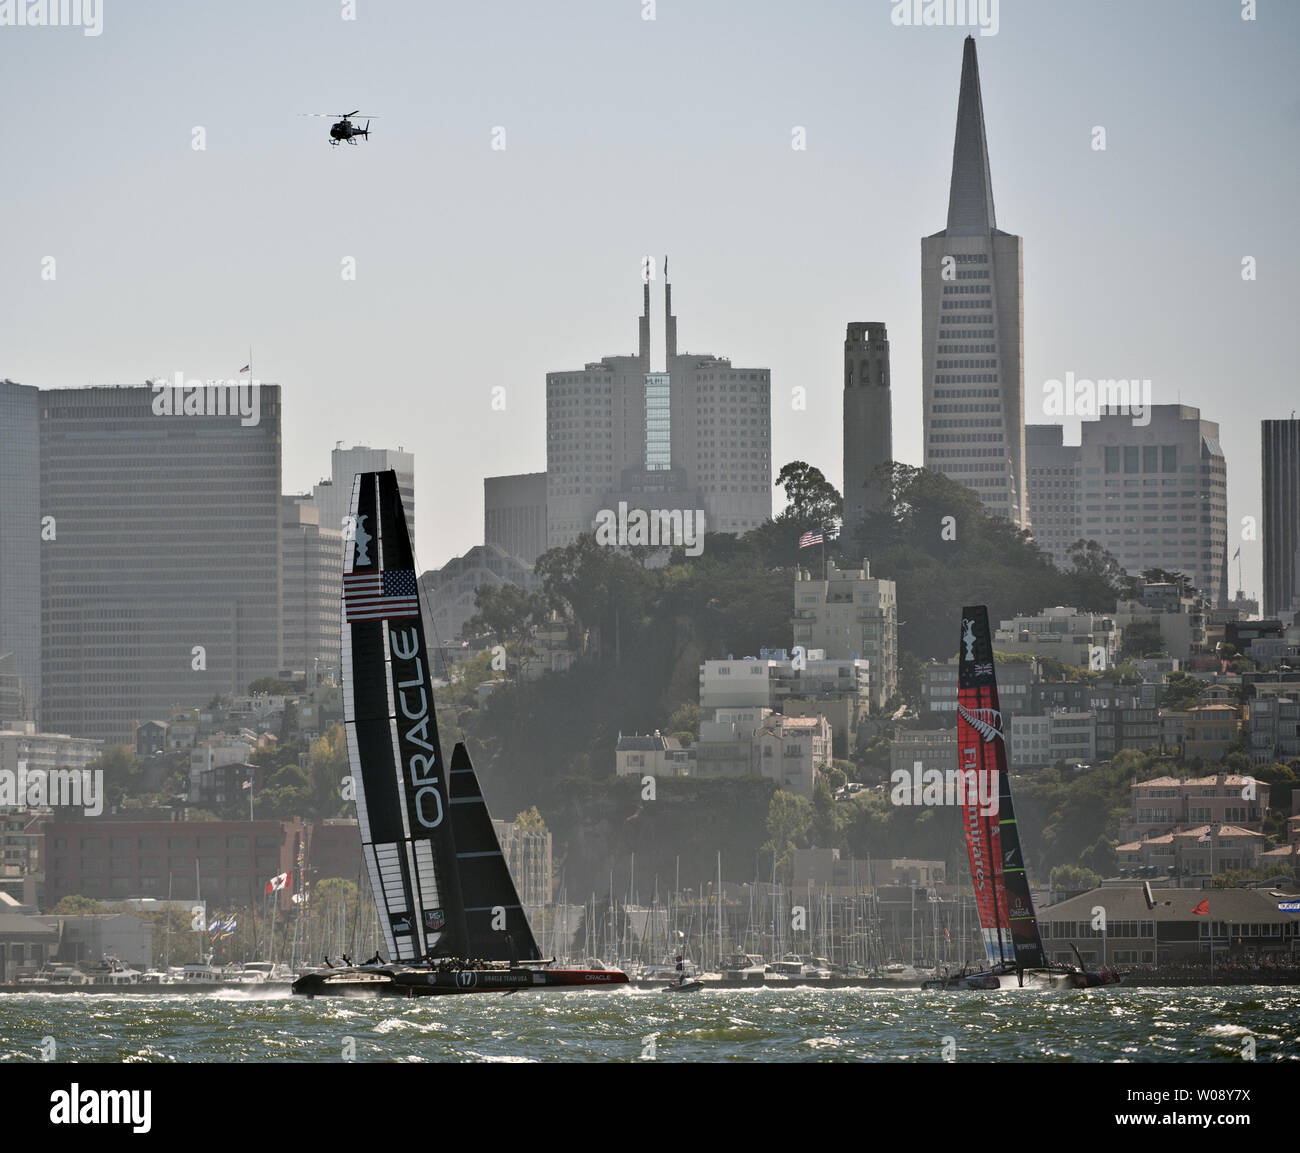 Oracle Team USA (L) leads Emirates New Zealand upwind in race 12 of the America's Cup Regatta on San Francisco Bay on September 19, 2013. The Americans lead all the way and won the race. The score is now 8-2 for the Kiwis.     UPI/Terry Schmitt Stock Photo